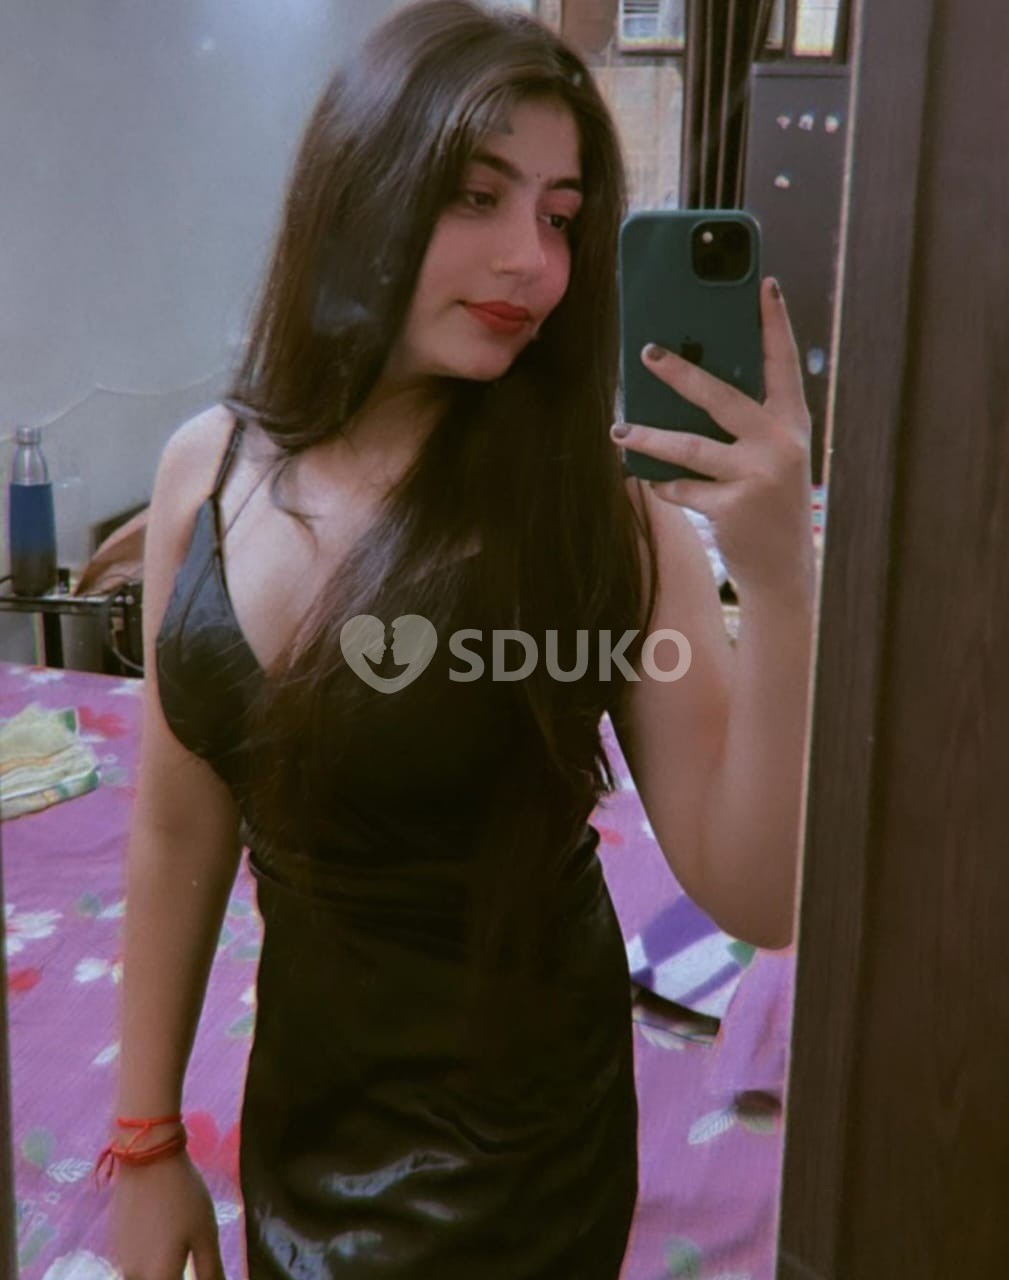 ⭐⭐Puri...💯% safeBest Vvip High Profile College And Bhabhis Safe Escort Service Available